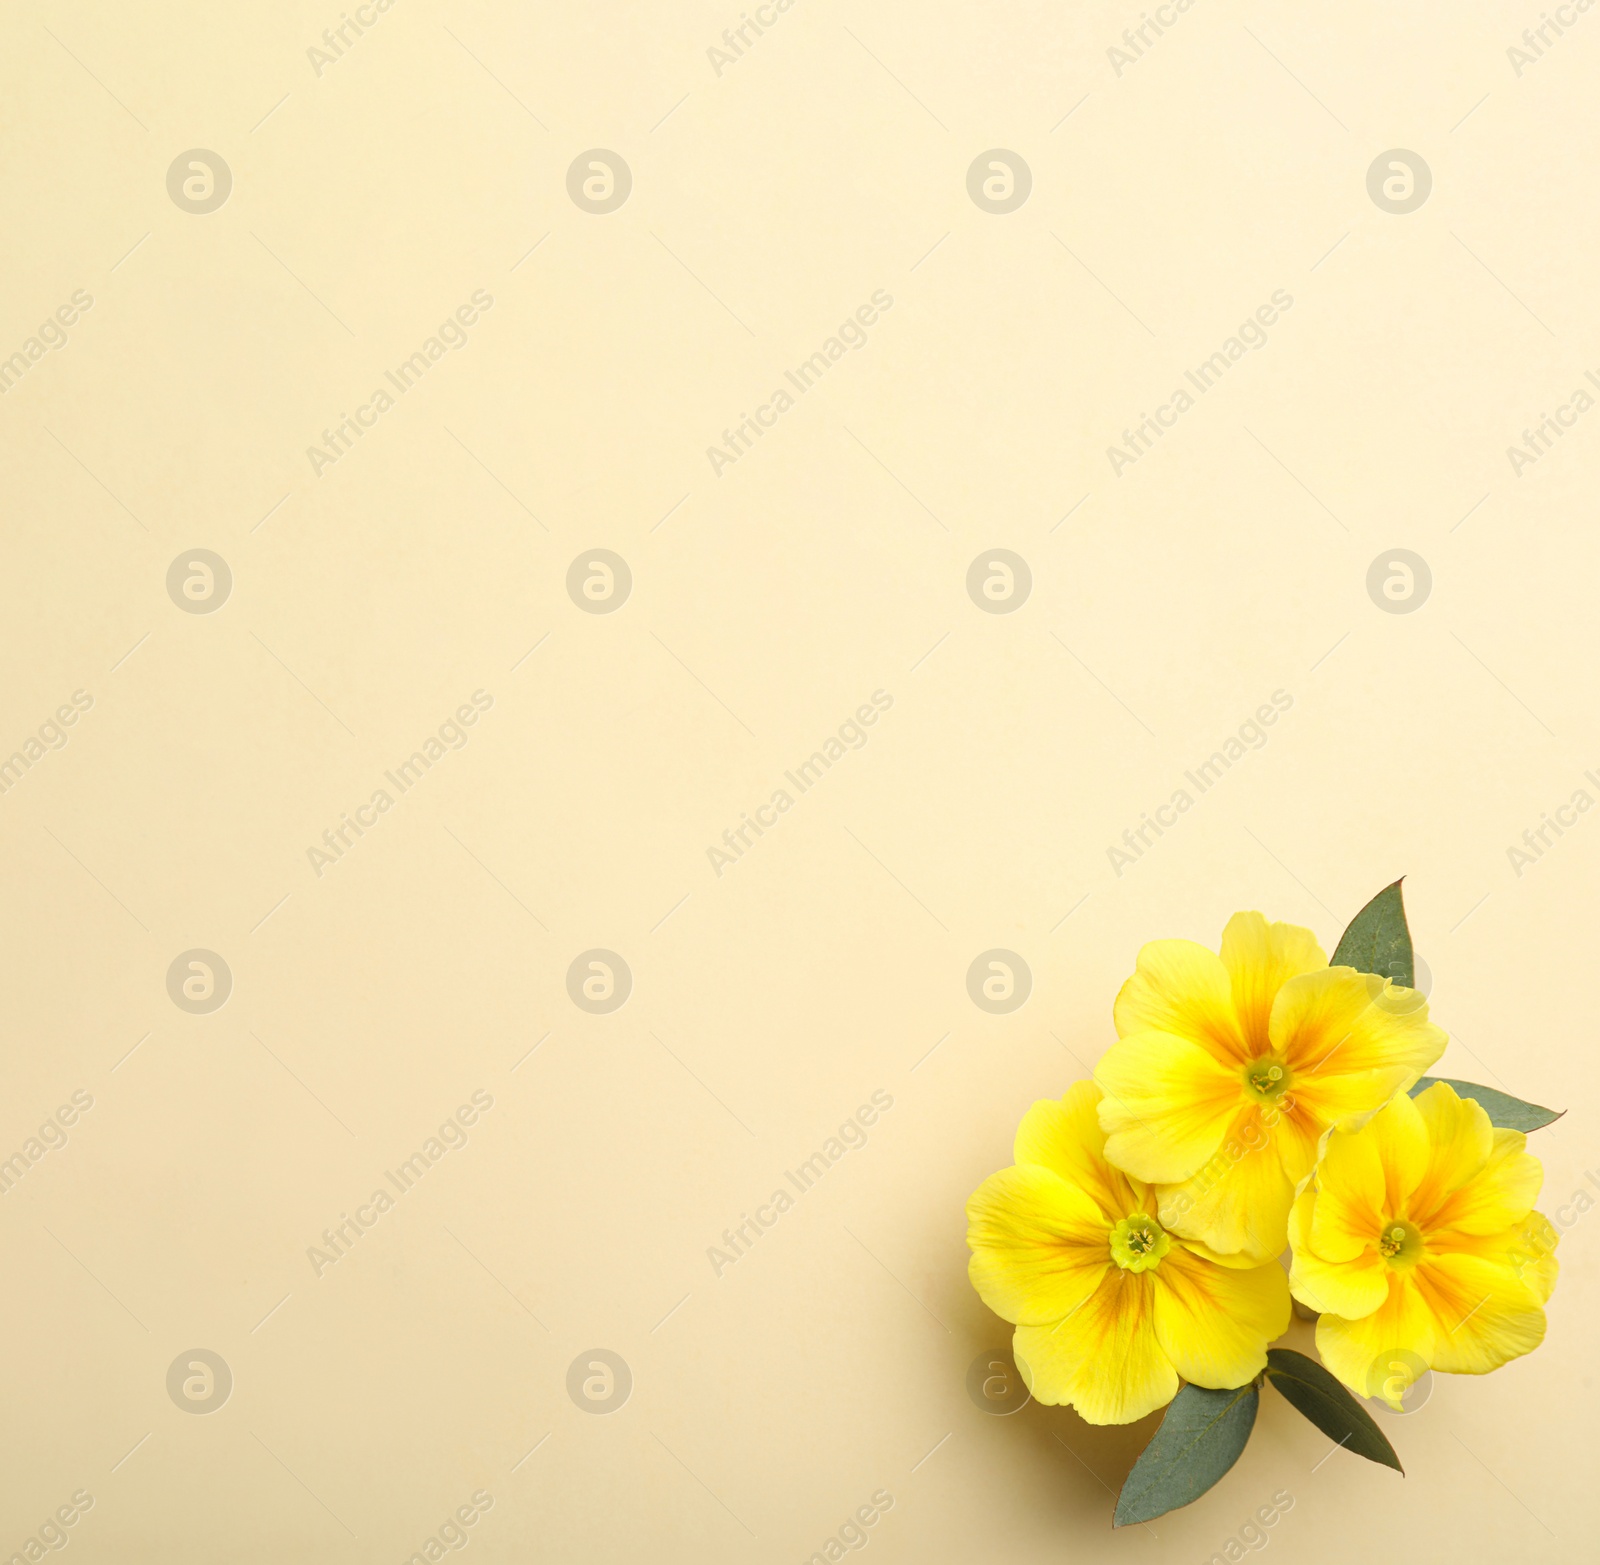 Photo of Primrose Primula Vulgaris flowers on beige background, top view with space for text. Spring season